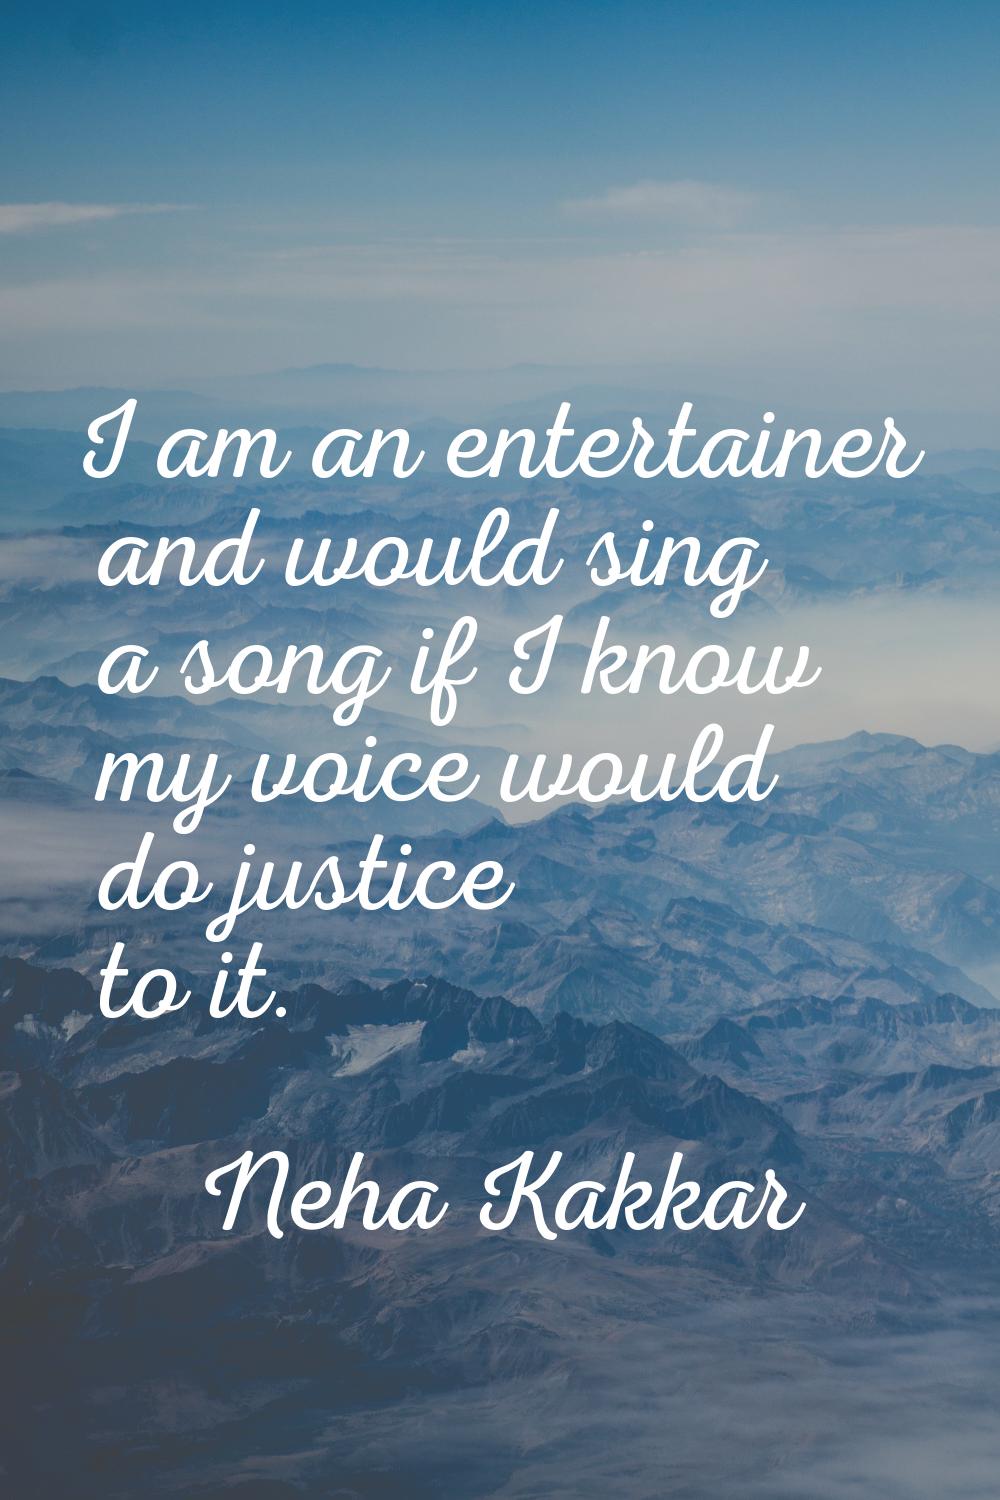 I am an entertainer and would sing a song if I know my voice would do justice to it.